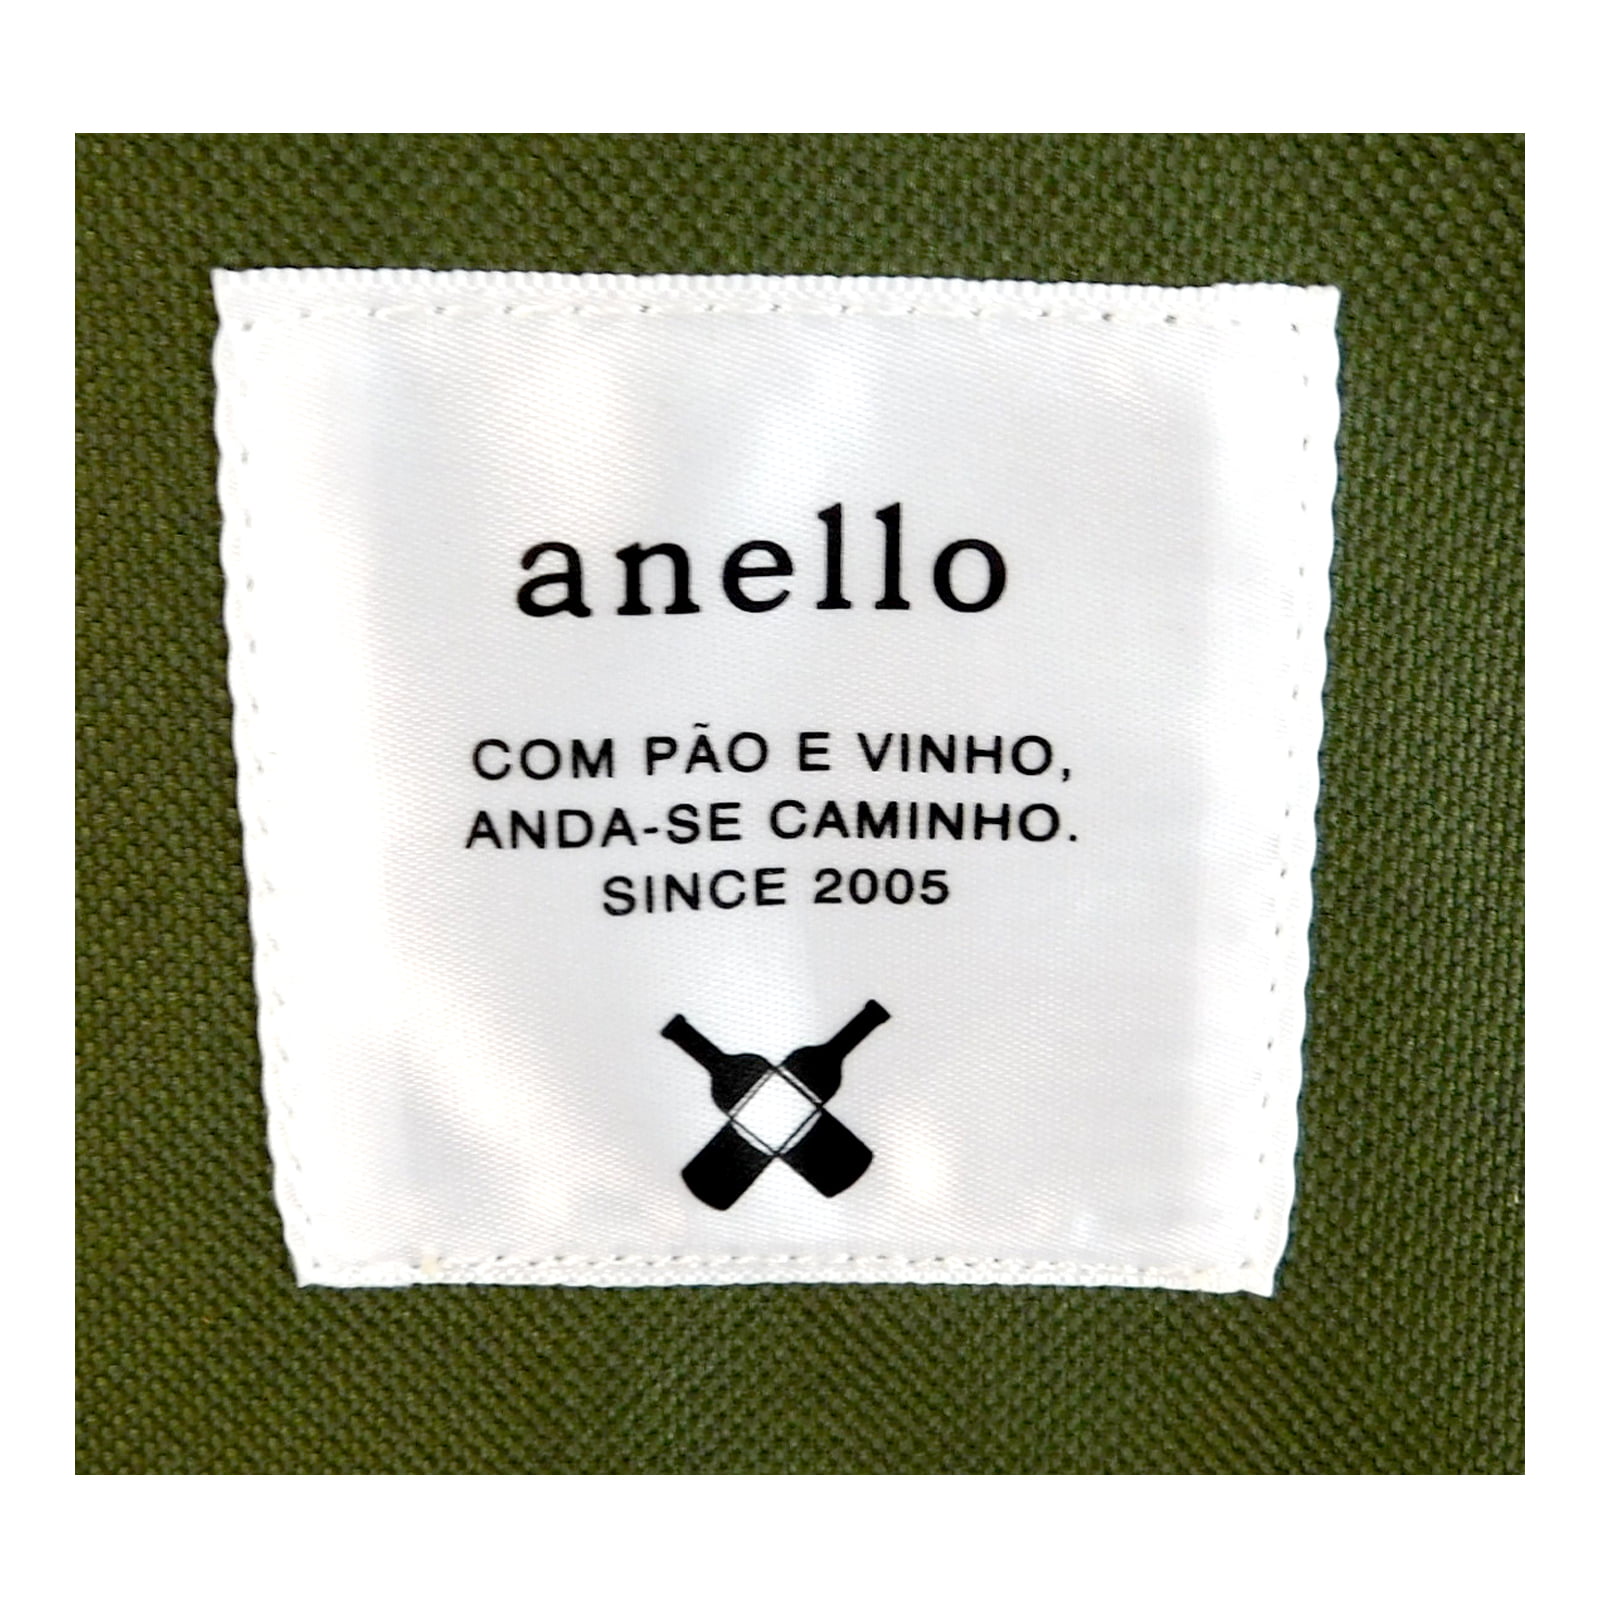 Anello Japan Bags Origin Guaranteed Global Delivery 日本大口包工厂Janelleteo.com -  All anello seller says they selling original, Are they really original?  100%假货#fake 分享假anello，请Share！l